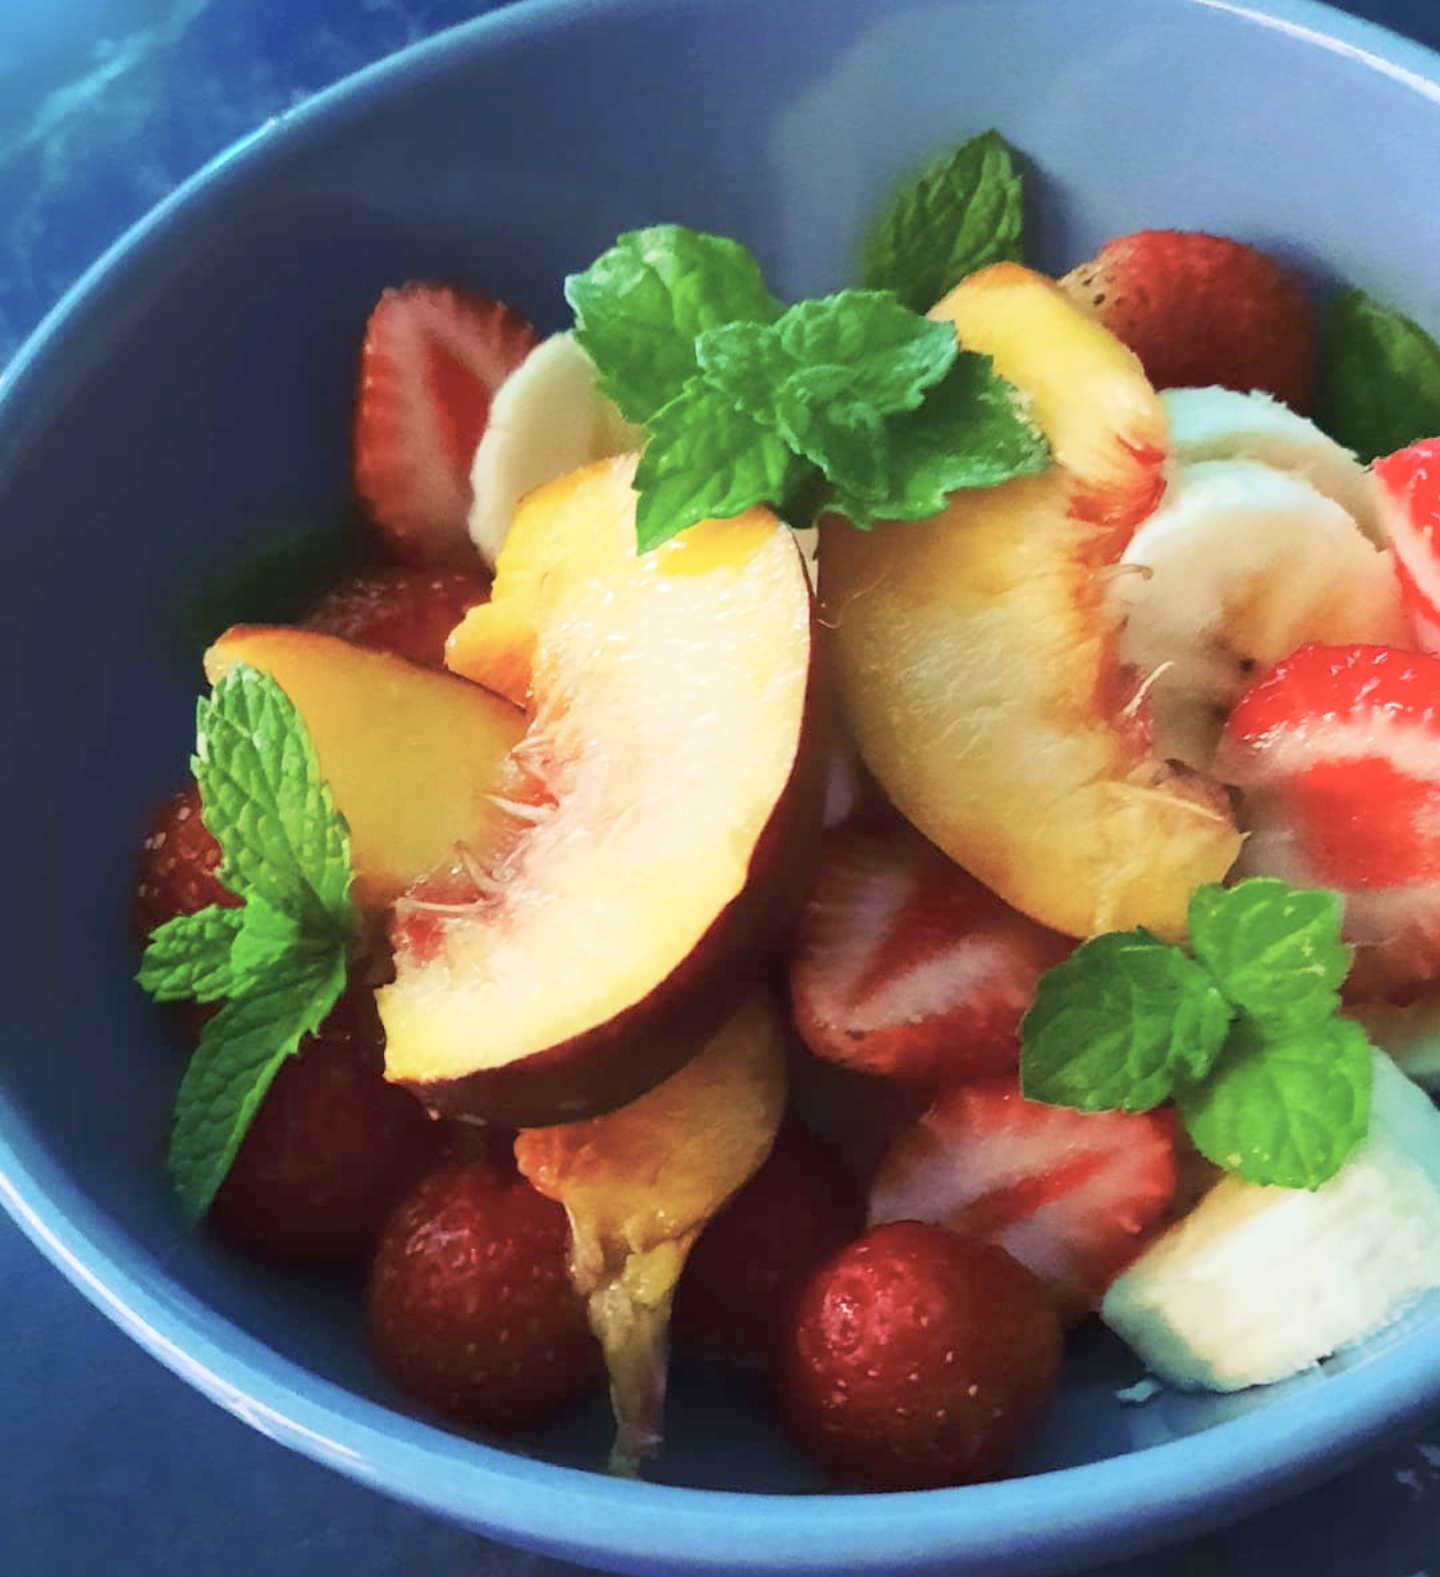 peach fruit salad recipe with mint in fruit salad healthy recipes with peaches and mint summer recipes gluten free raw vegan summer bbq fruit salads different fruit salad with mint leaves